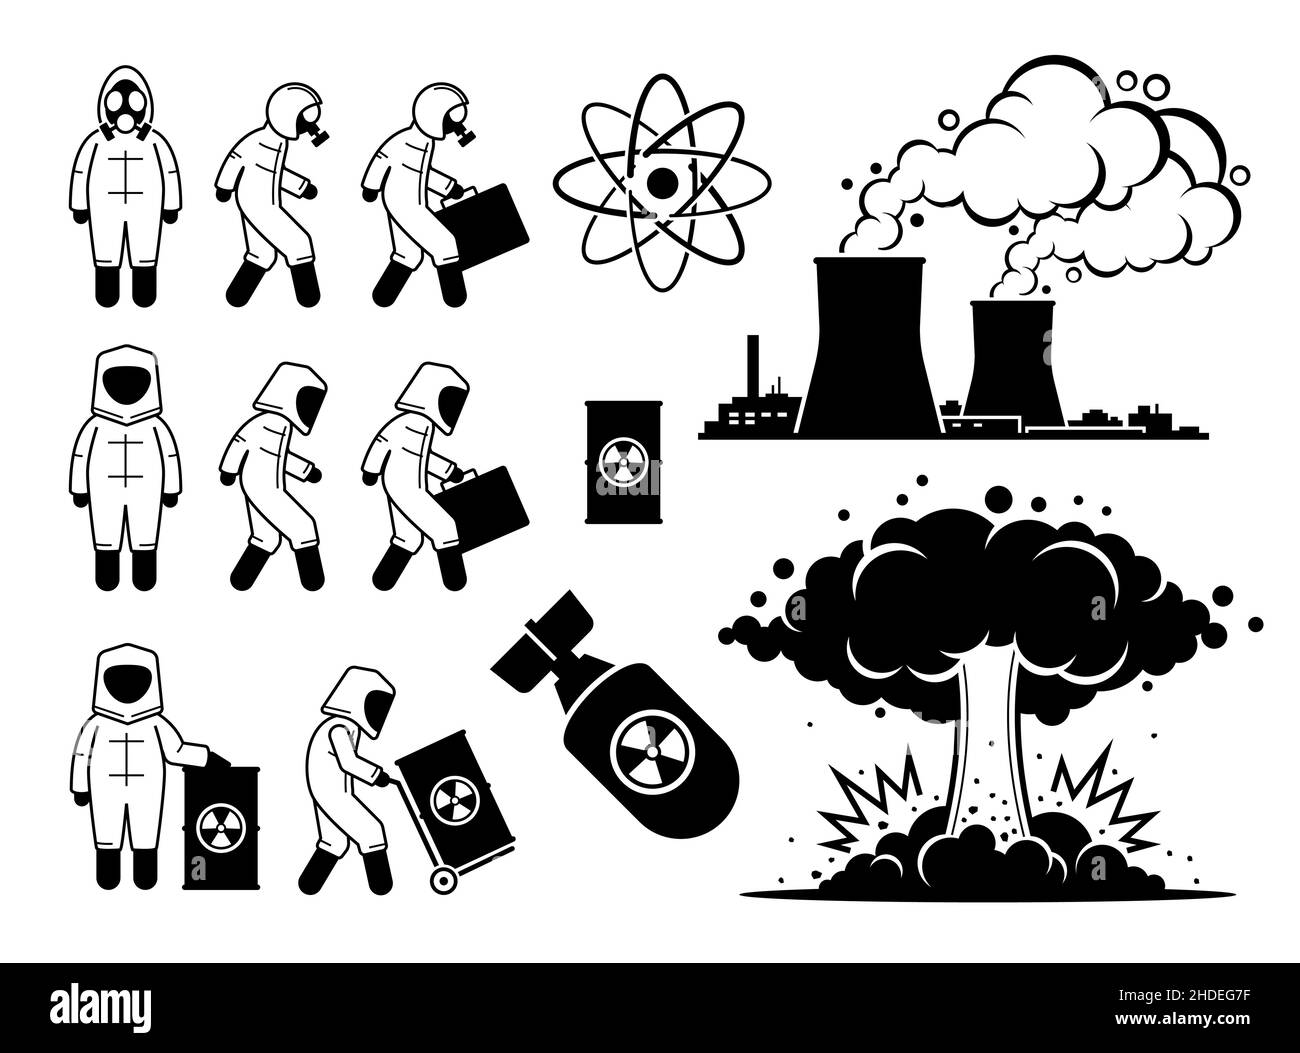 Modern History Atomic Age or Nuclear Age. Vector illustrations depict nuclear power plant, hazmat suit worker, radioactive waste, atom nuclear bomb, a Stock Vector